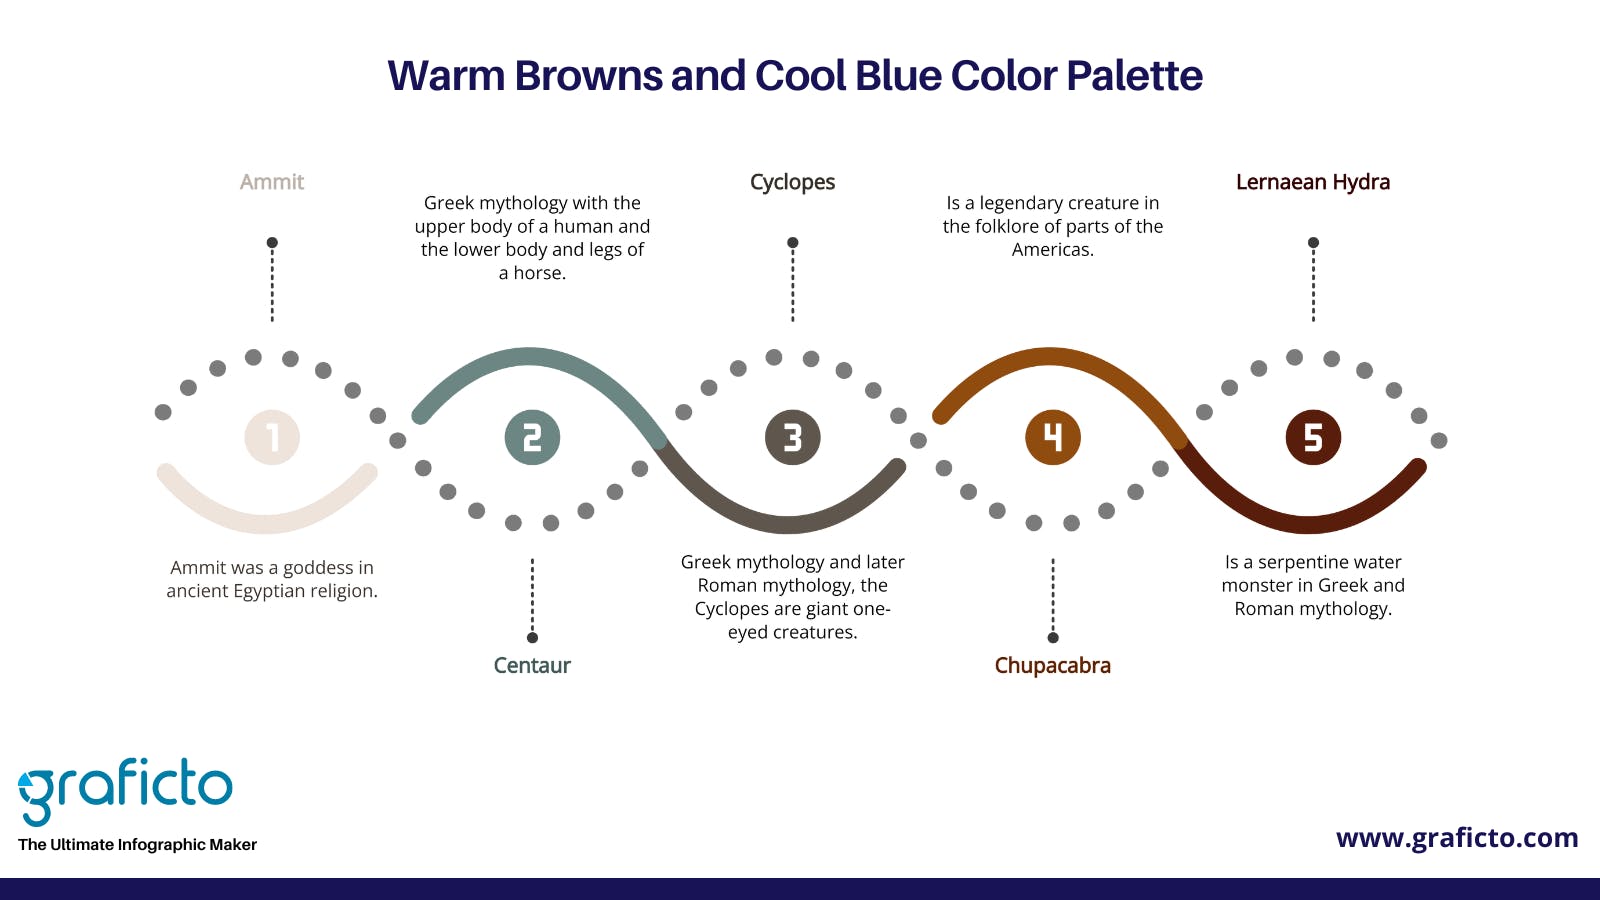 Warm Browns and Cool Blue graficto Christmas Color Palettes